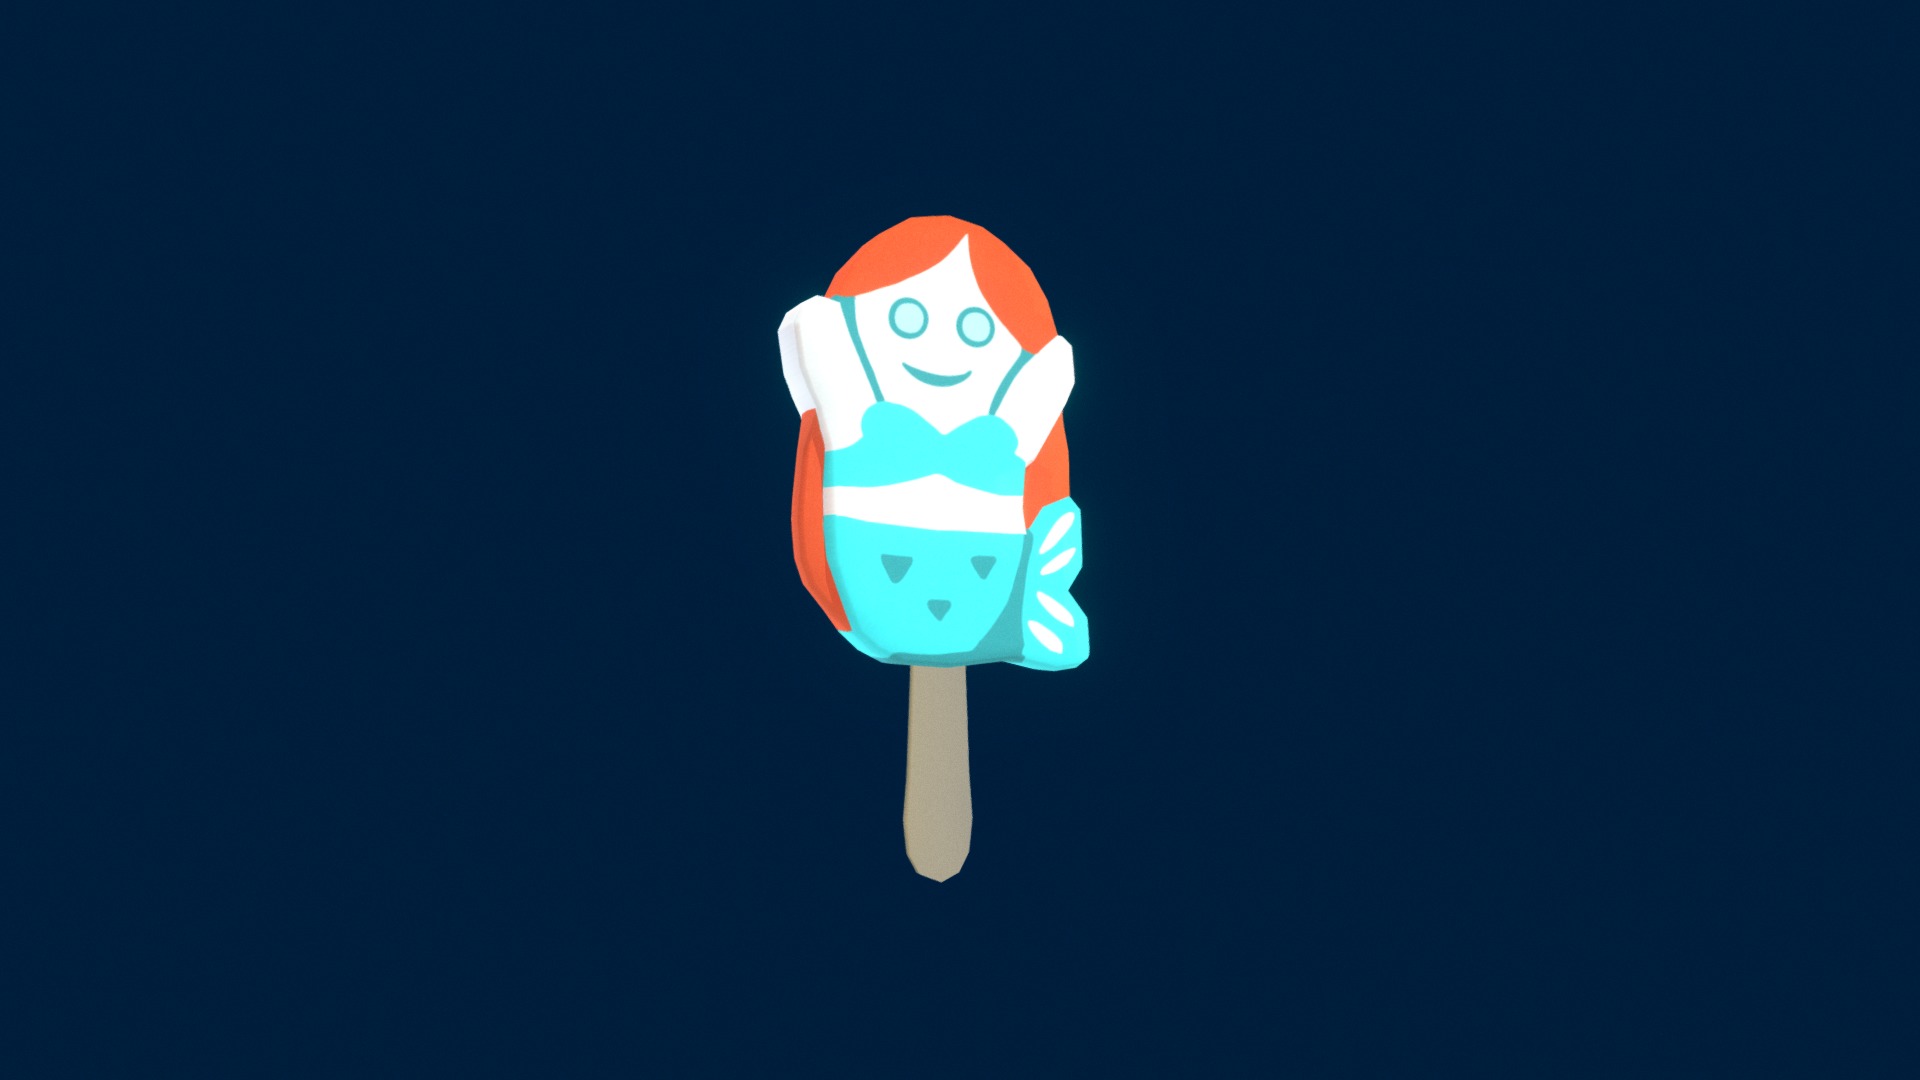 3D model mermaid ice cream - This is a 3D model of the mermaid ice cream. The 3D model is about a cartoon character on a blue background.